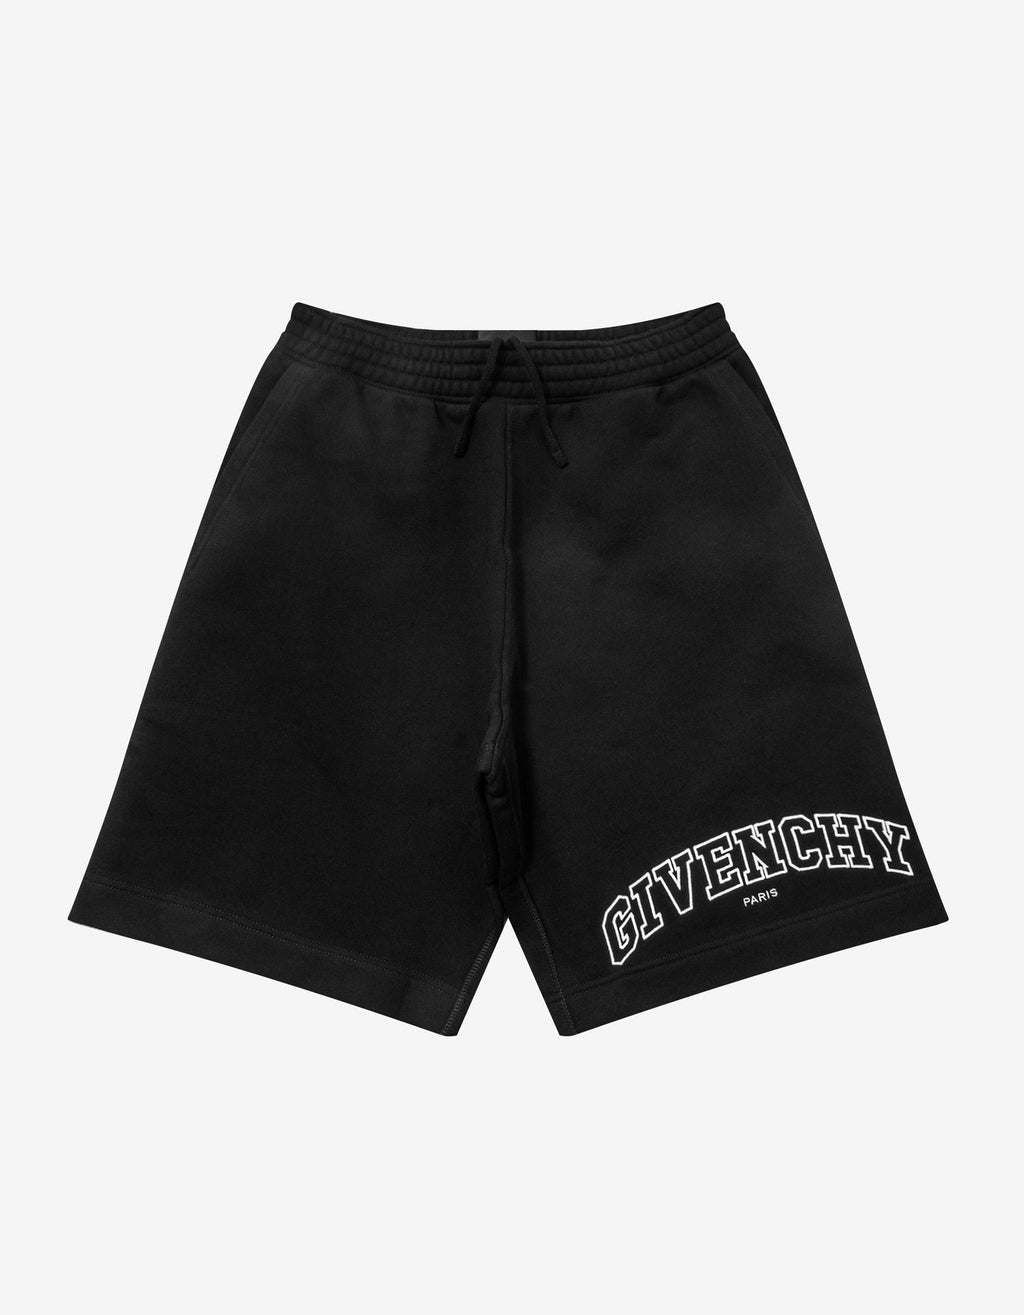 Givenchy Givenchy Black Embroidered College Logo Sweat Shorts